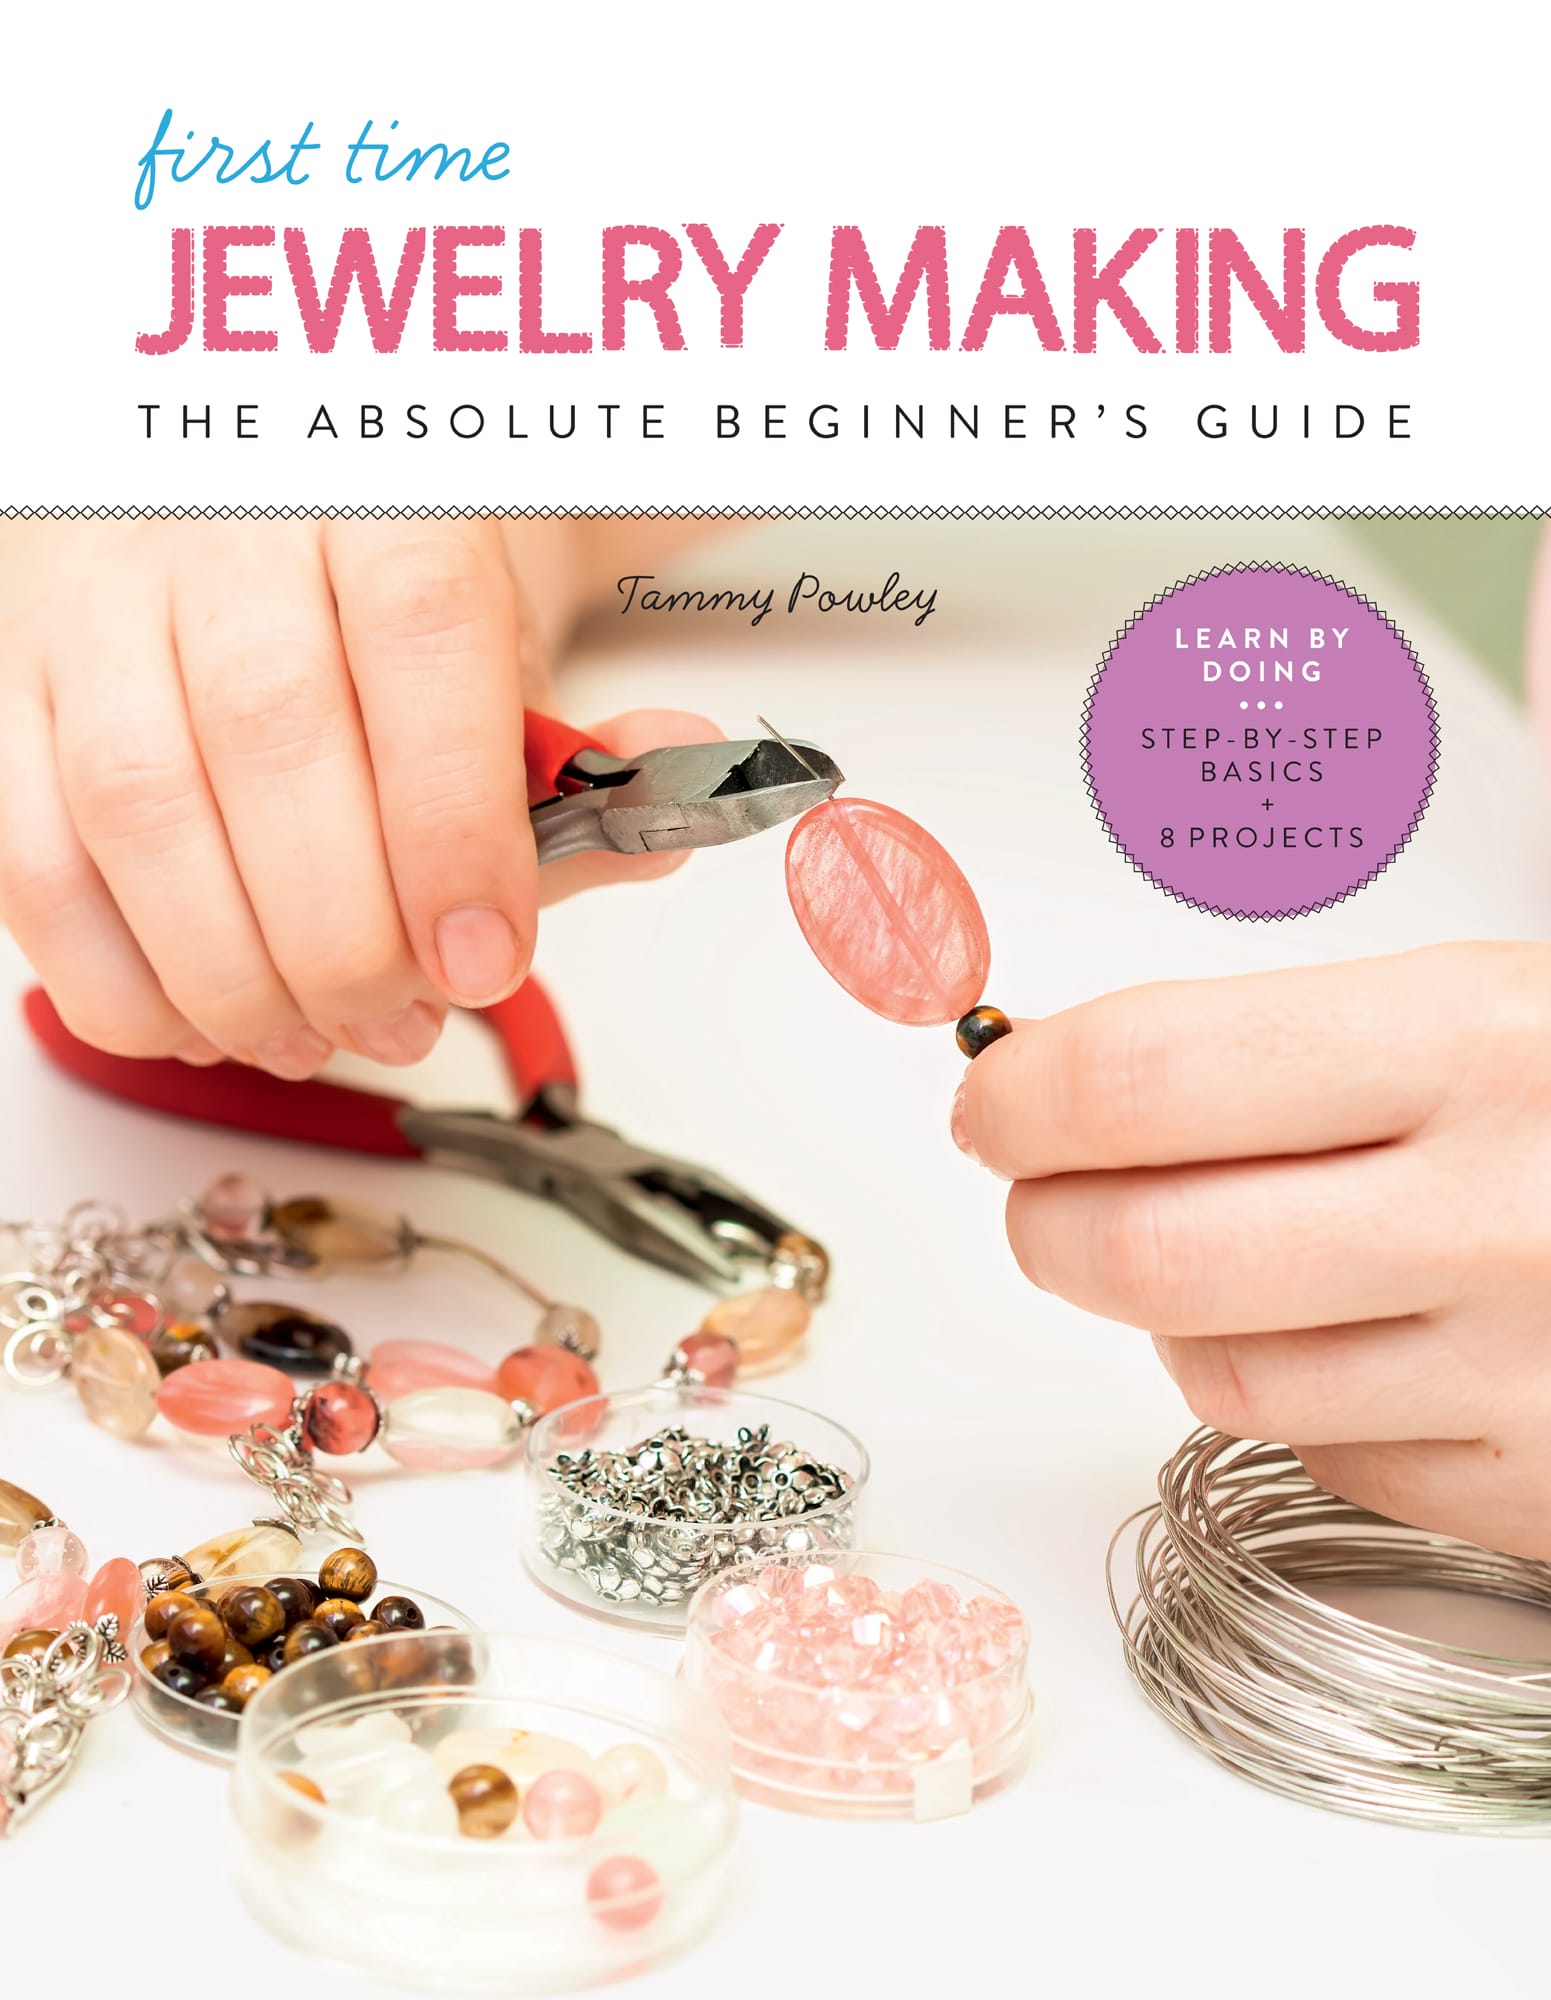 first time JEWELRY MAKING THE ABSOLUTE BEGINNERS GUIDE by Tammy Powley - photo 1